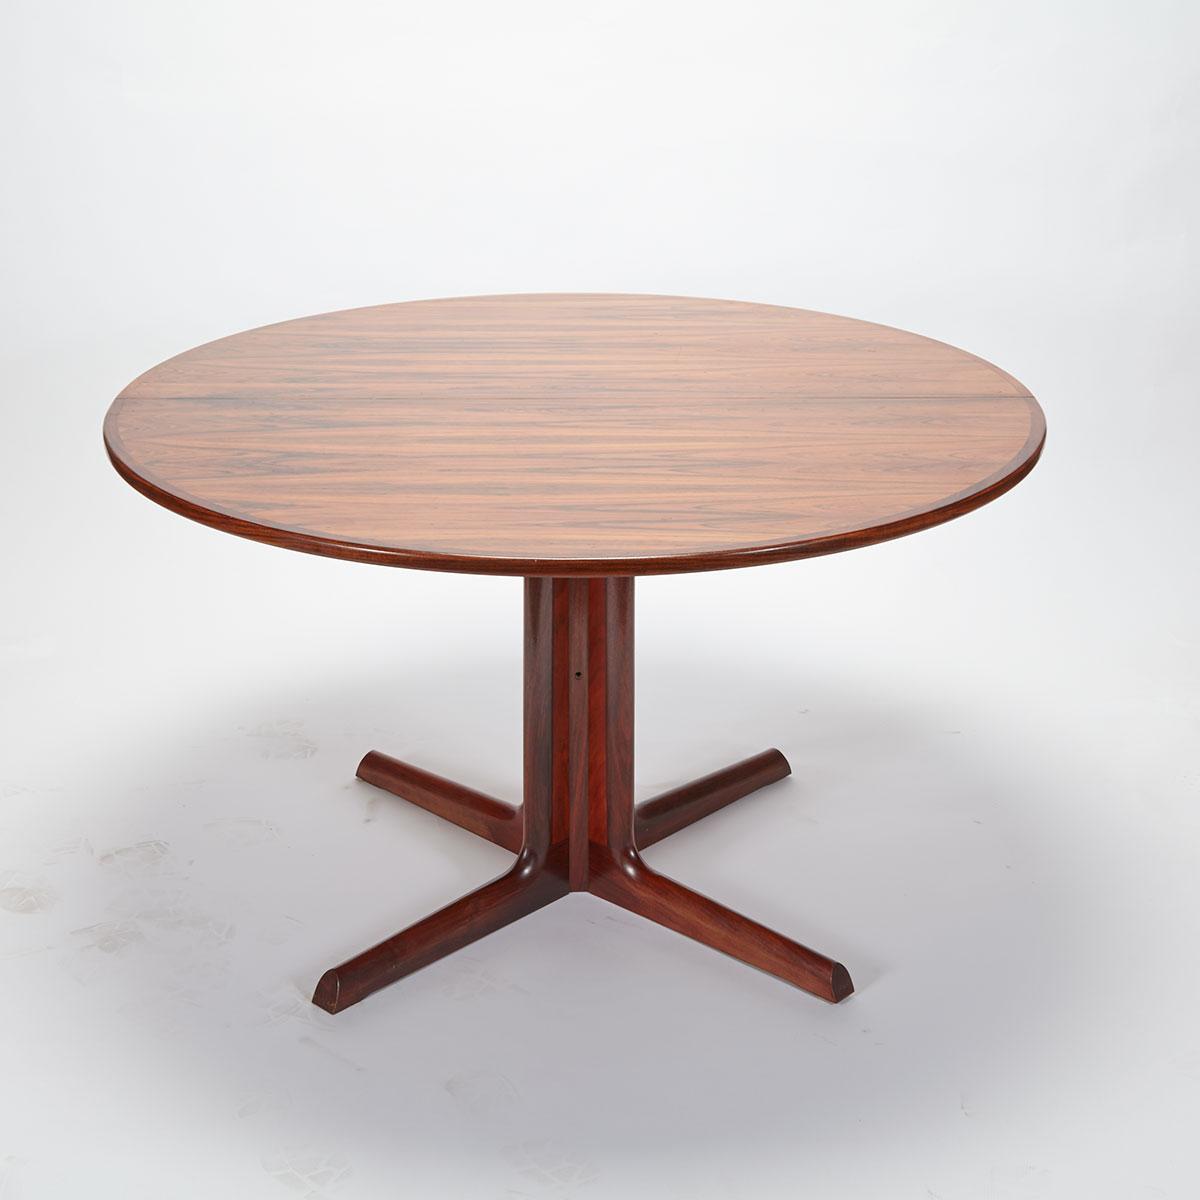 Niels O. Moller (Danish, 1920-1982) Rosewood and Teak Extension Dining Table, Gudme Mobelfabrik, mid 20th century